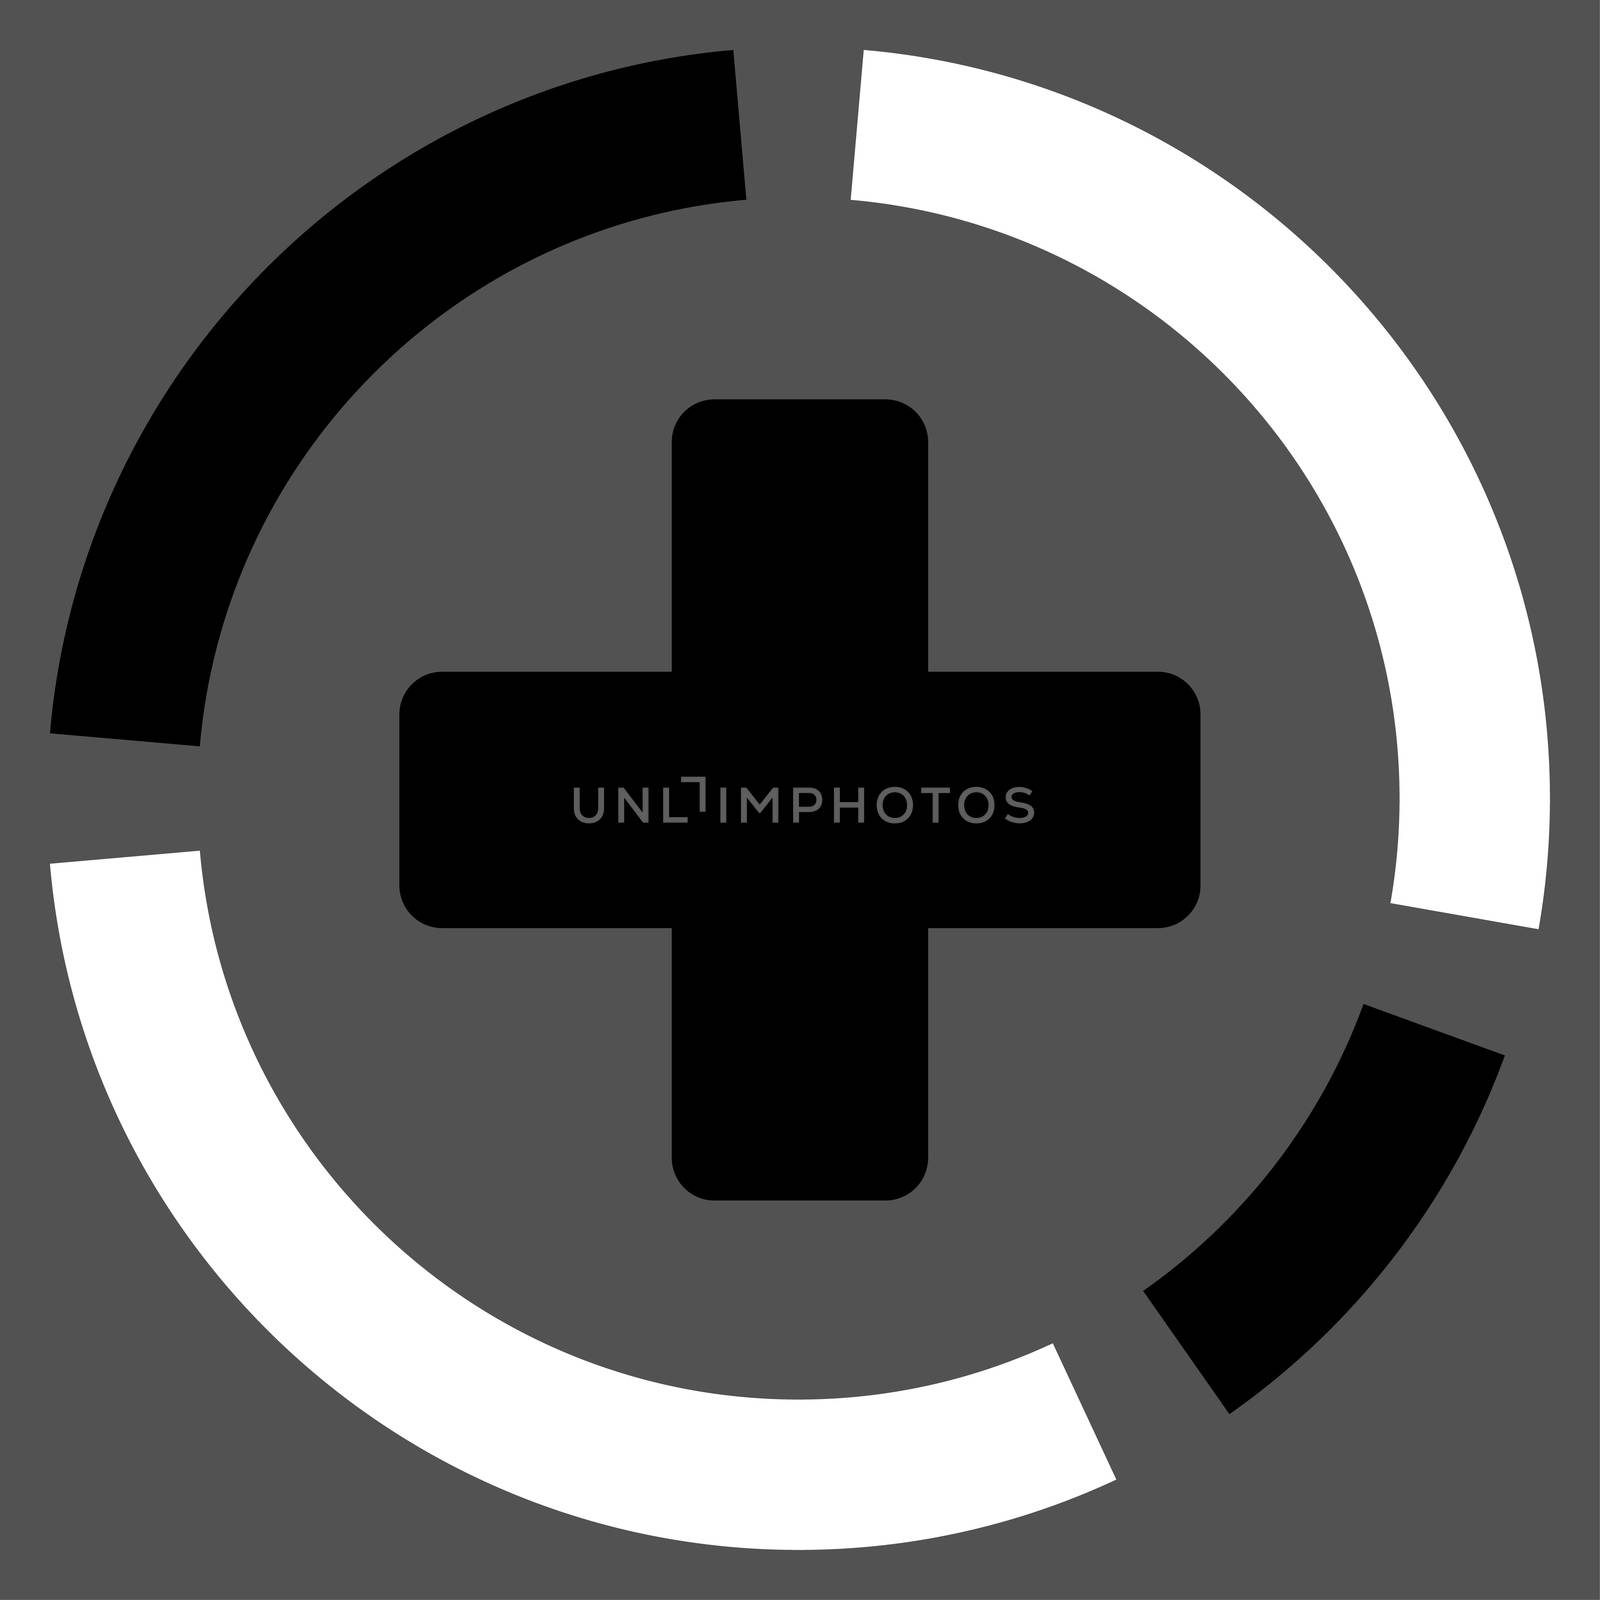 Health Care Diagram raster icon. Style is bicolor flat symbol, black and white colors, rounded angles, gray background.